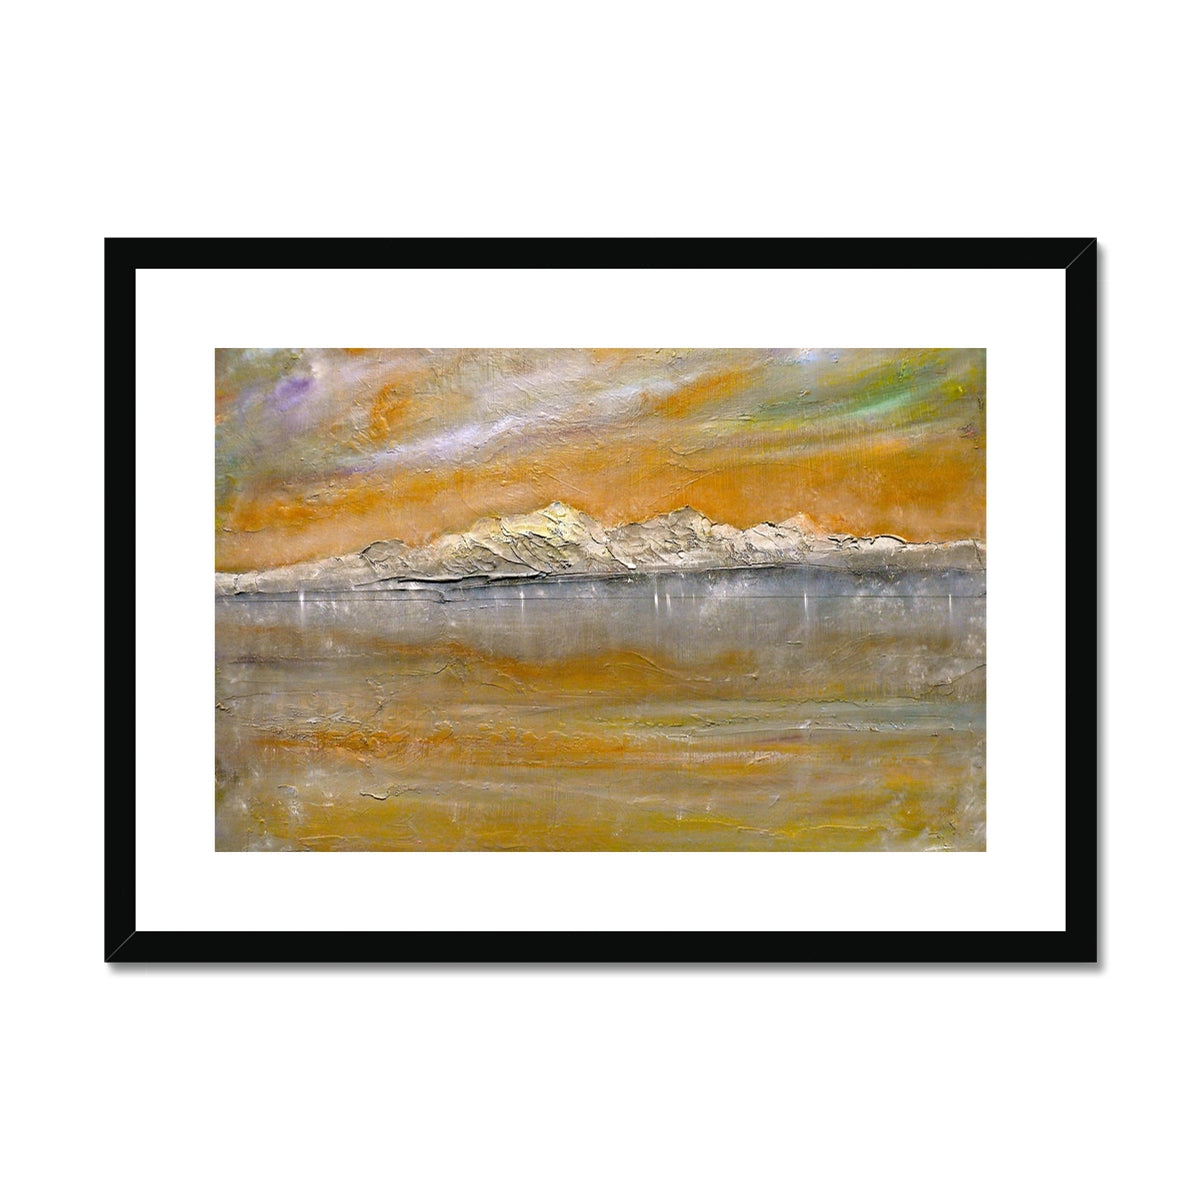 Arran Snow Painting | Framed & Mounted Prints From Scotland-Framed & Mounted Prints-Arran Art Gallery-A2 Landscape-Black Frame-Paintings, Prints, Homeware, Art Gifts From Scotland By Scottish Artist Kevin Hunter